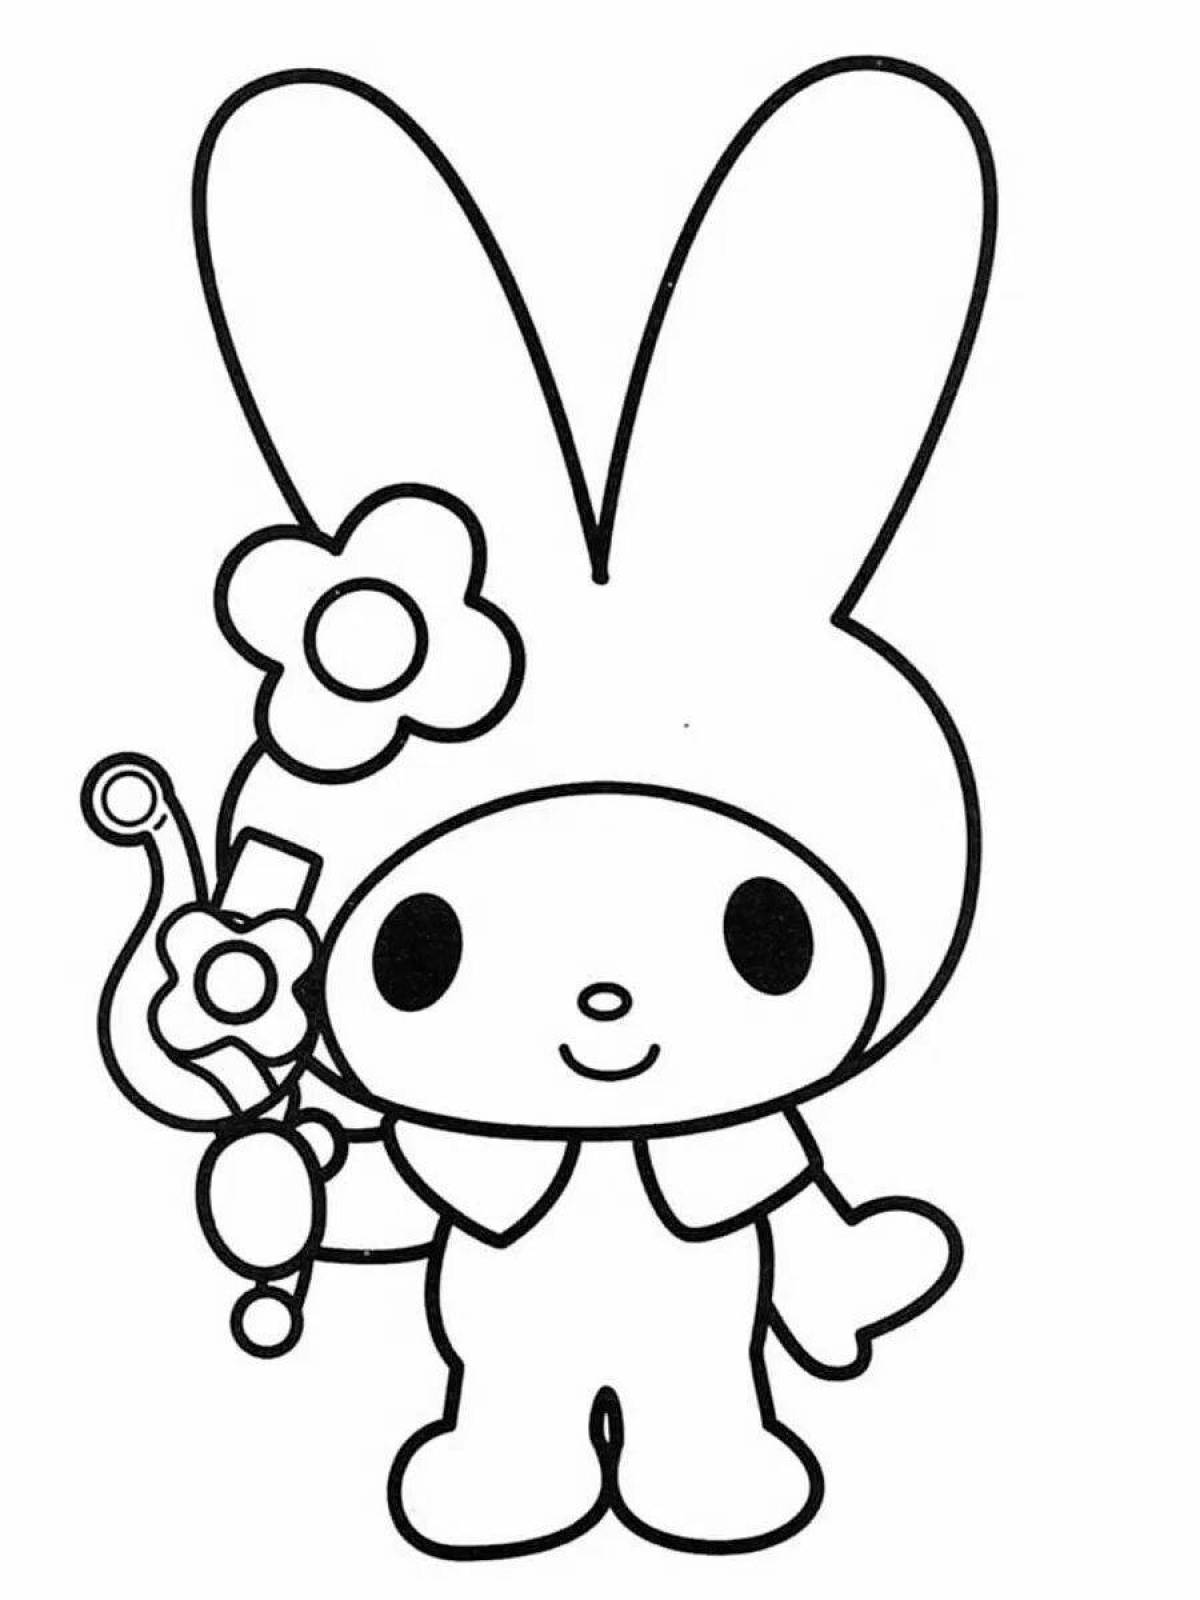 Awesome kuromi melody coloring page